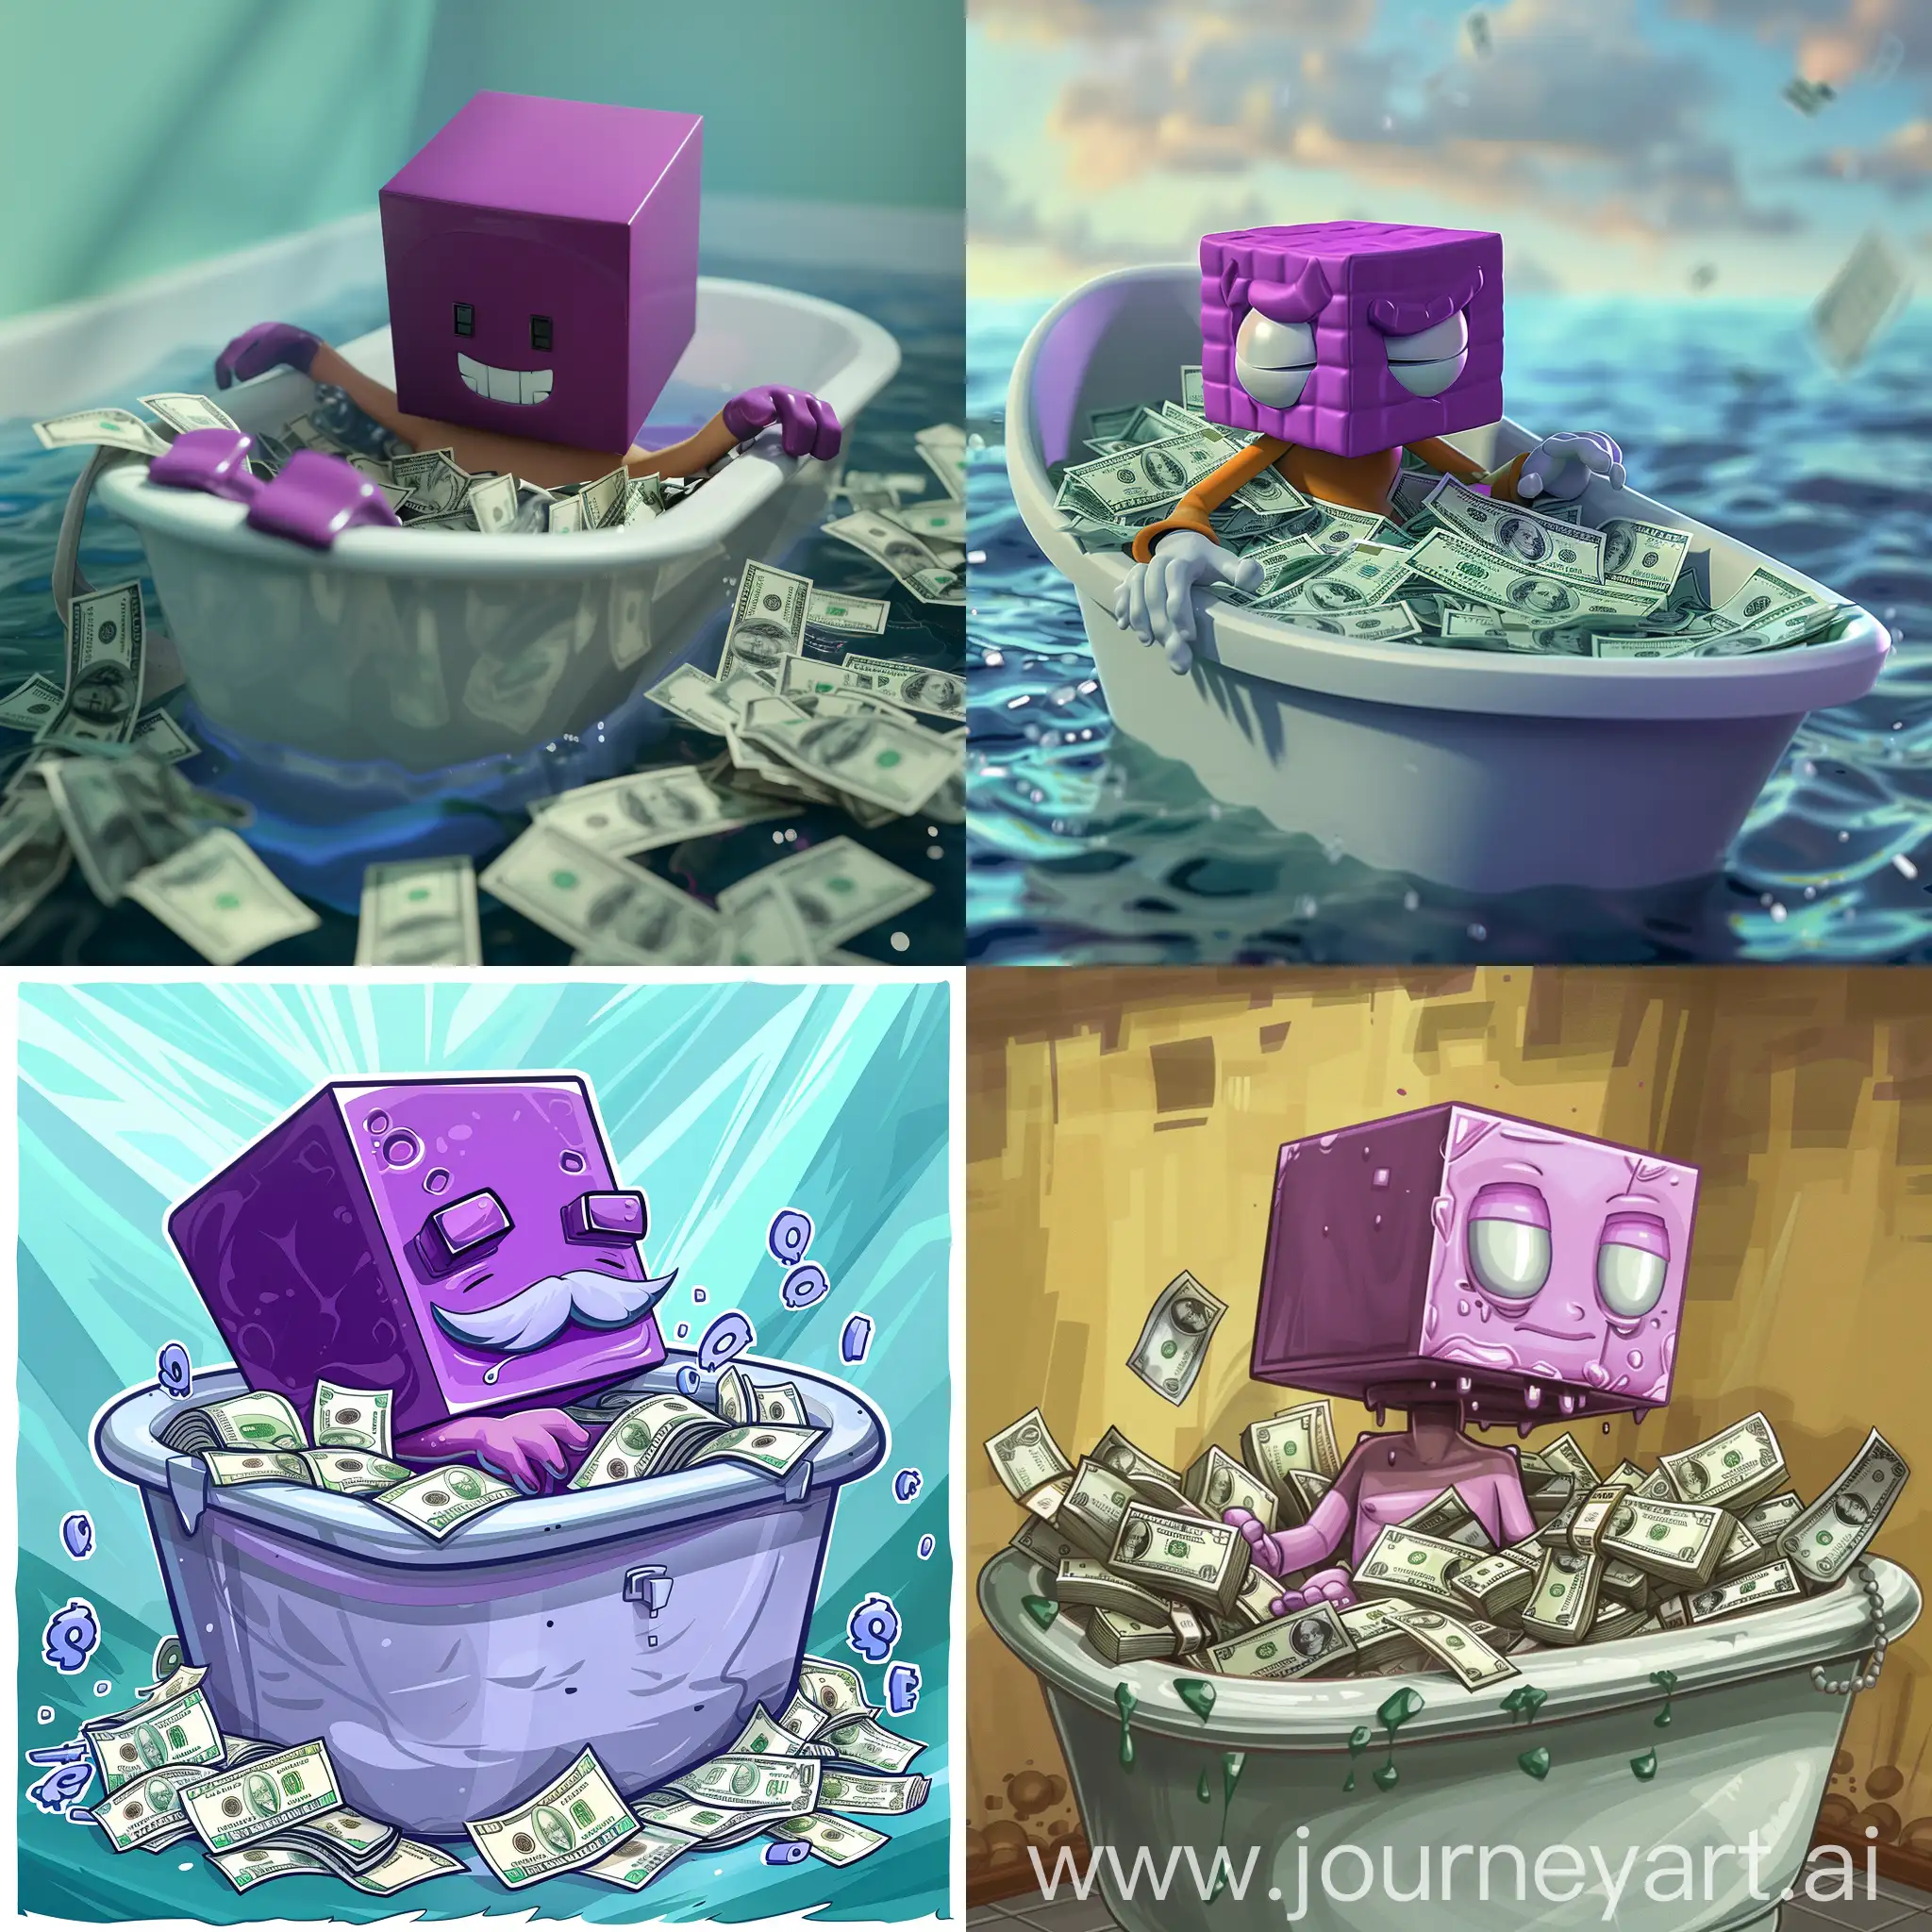 Eccentric-Wealth-Purple-CubeHeaded-Character-Lounging-in-a-Bathtub-Full-of-Dollars